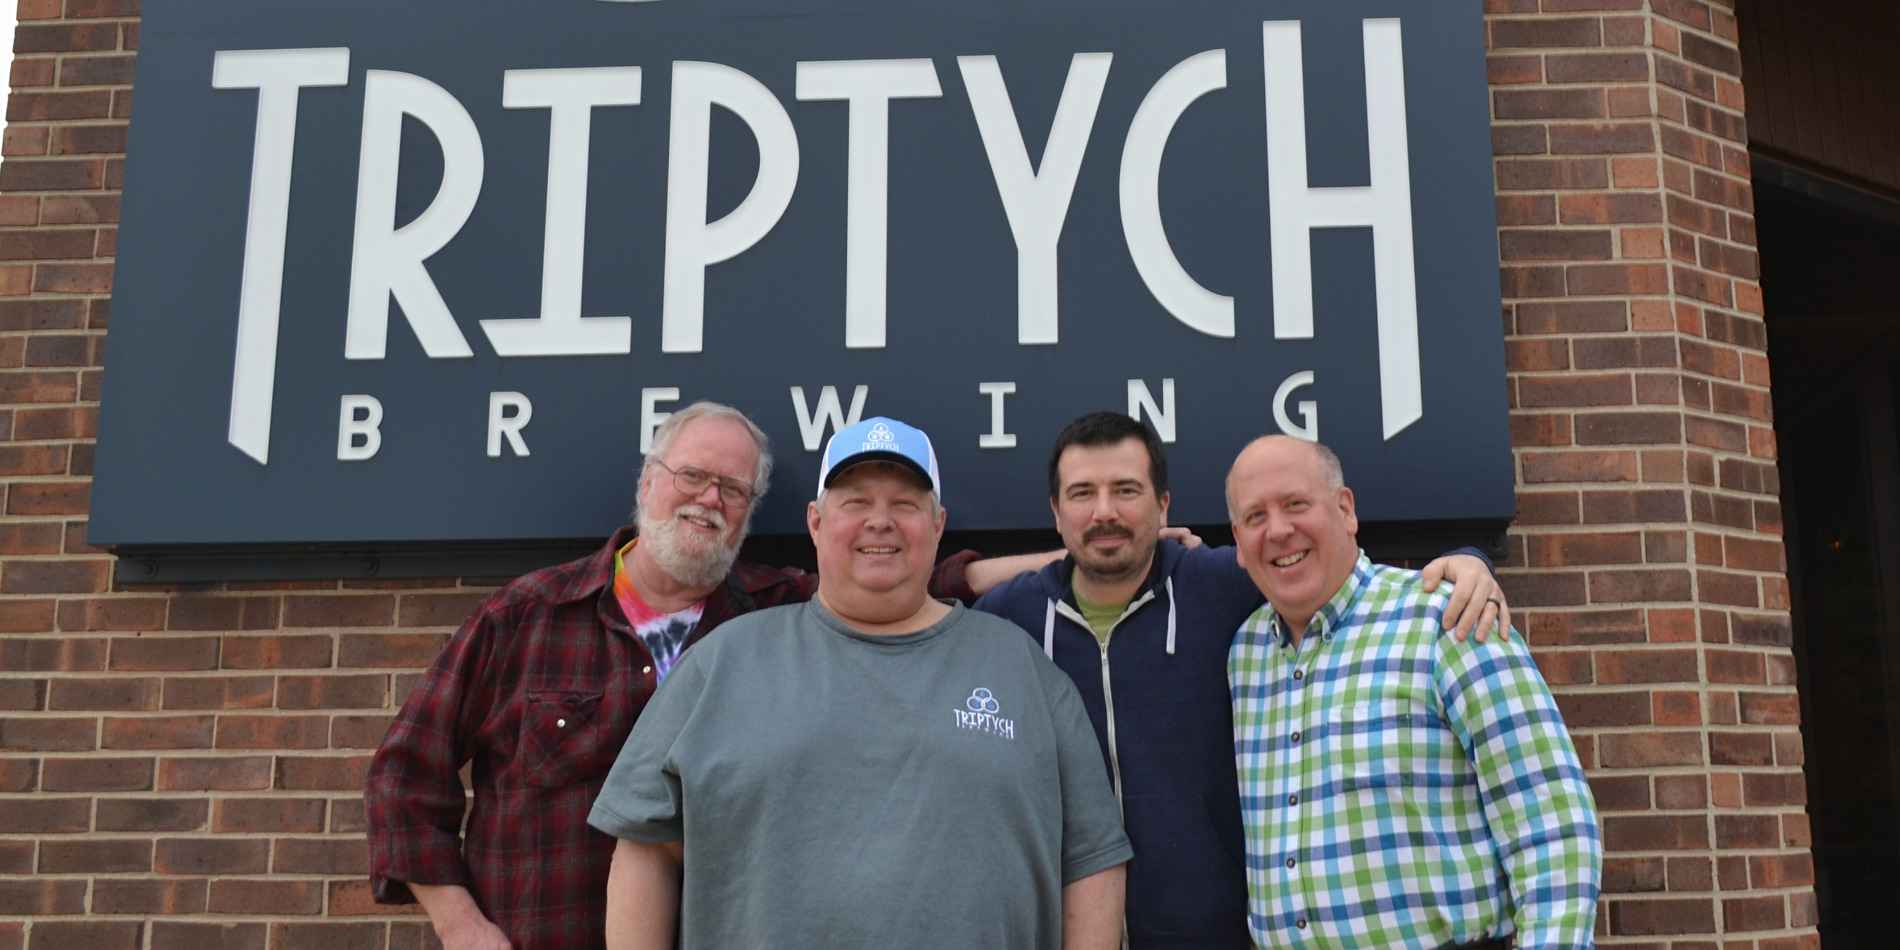 Four owners of Triptych Brewing stand in front of the navy sign outside the taproom in Savoy, Illinois.